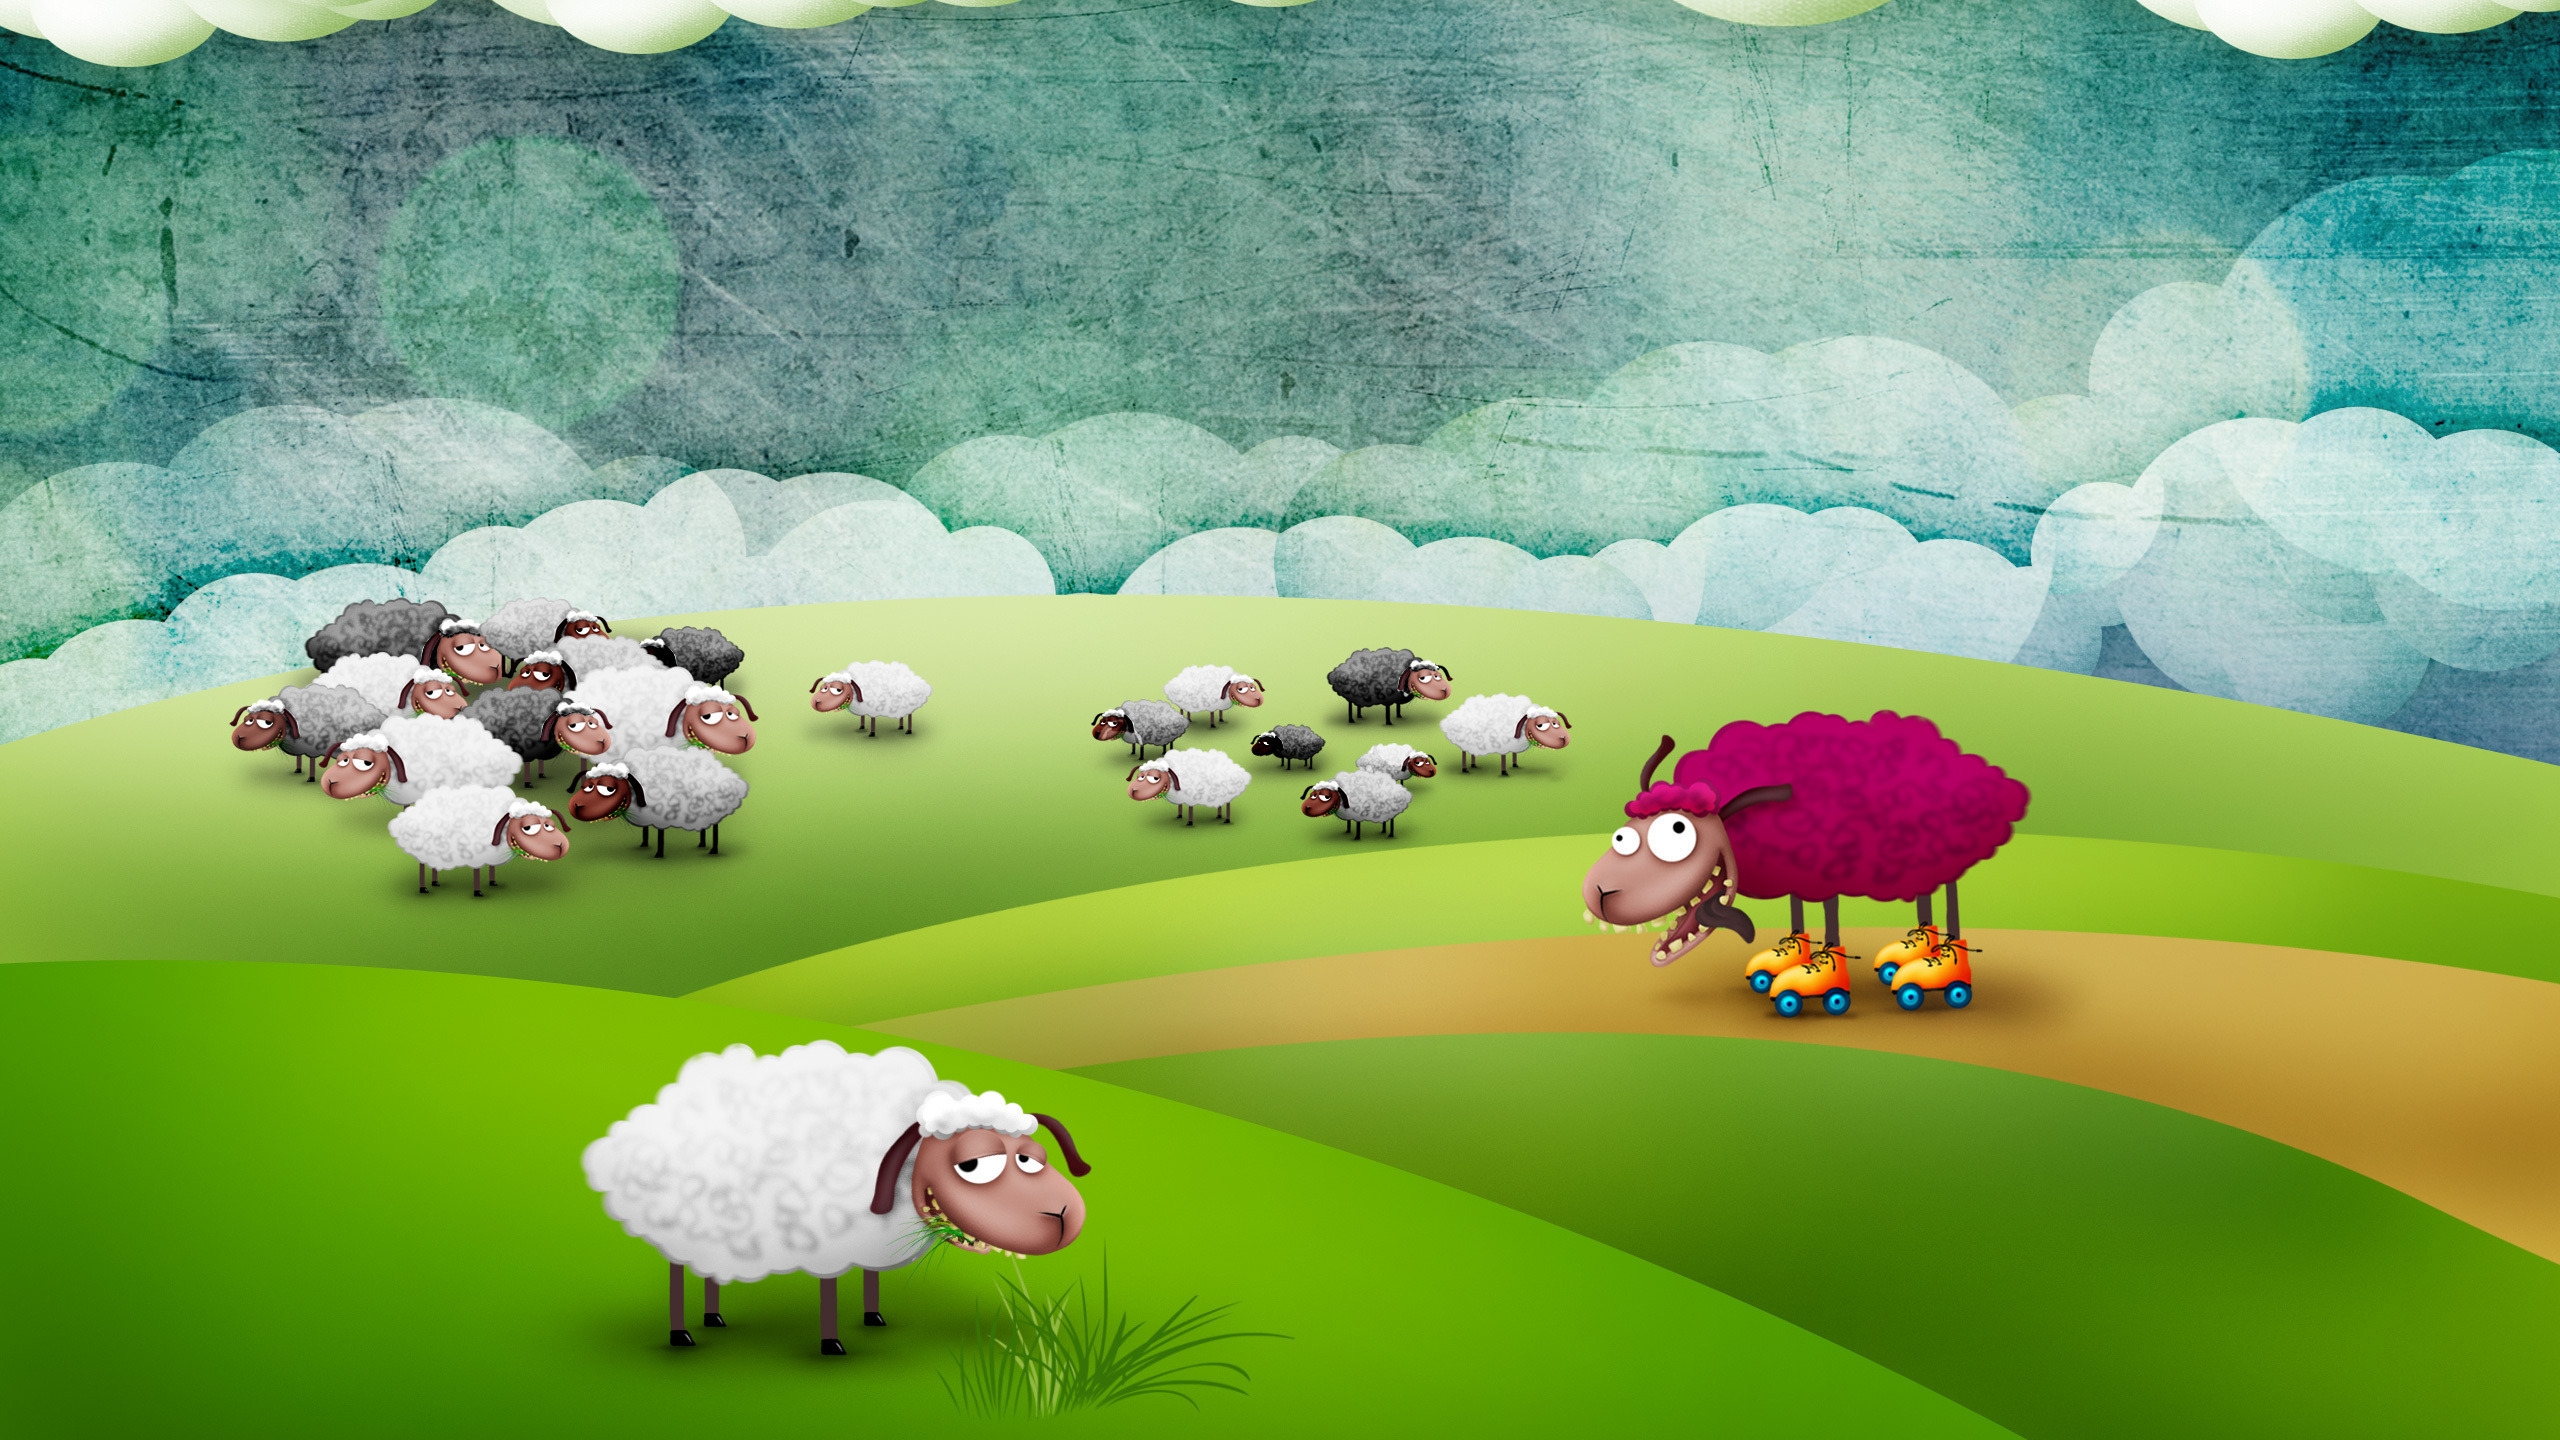 Crazy Sheep to Pasture for 2560x1440 HDTV resolution